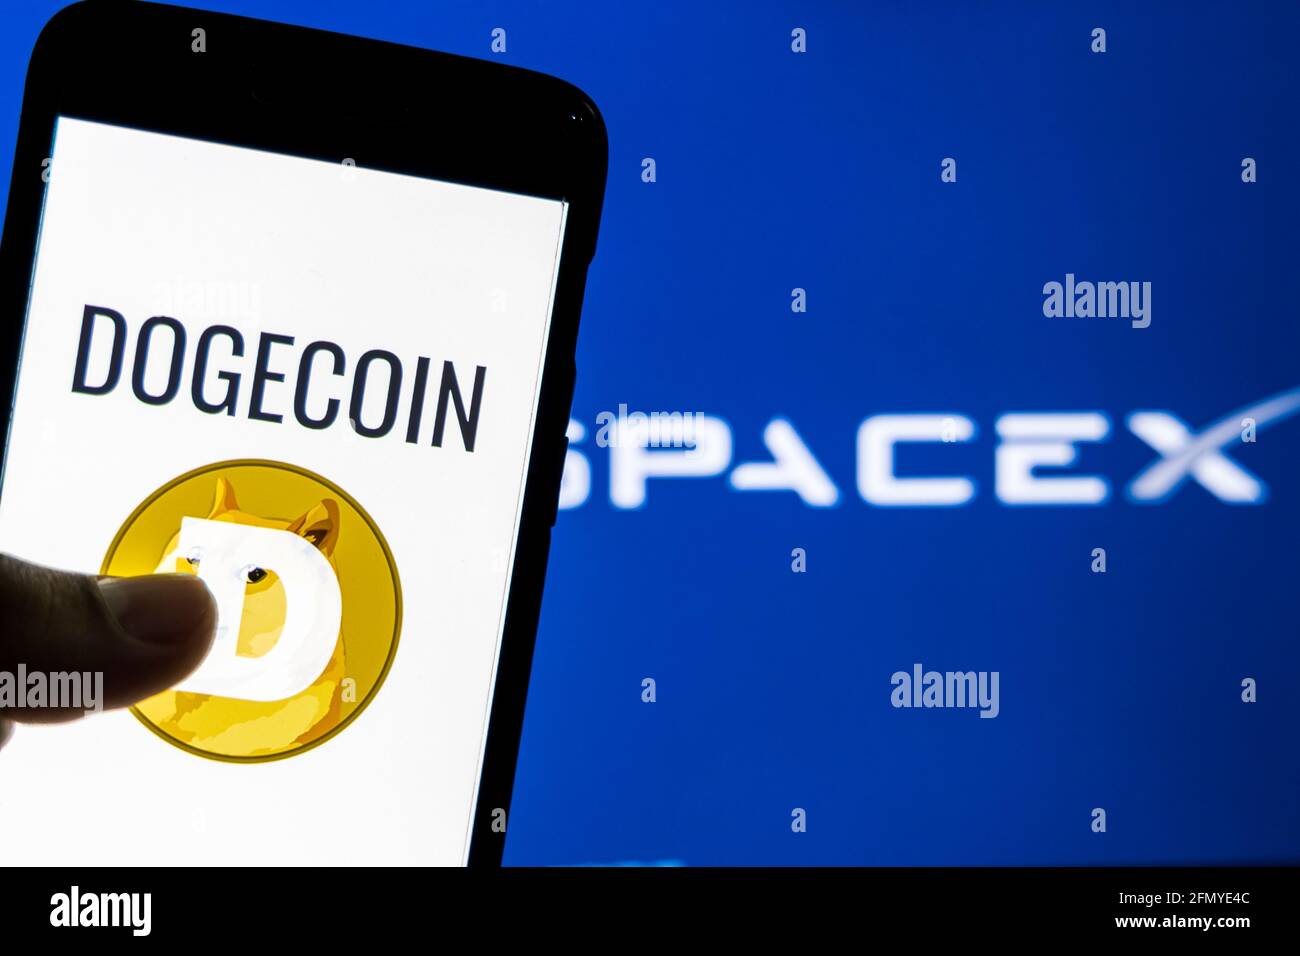 Dogecoin logo on a smartphone against SpaceX logo in the background. SpaceX accepts Dogecoin as payment to launch ‘DOG Stock Photo